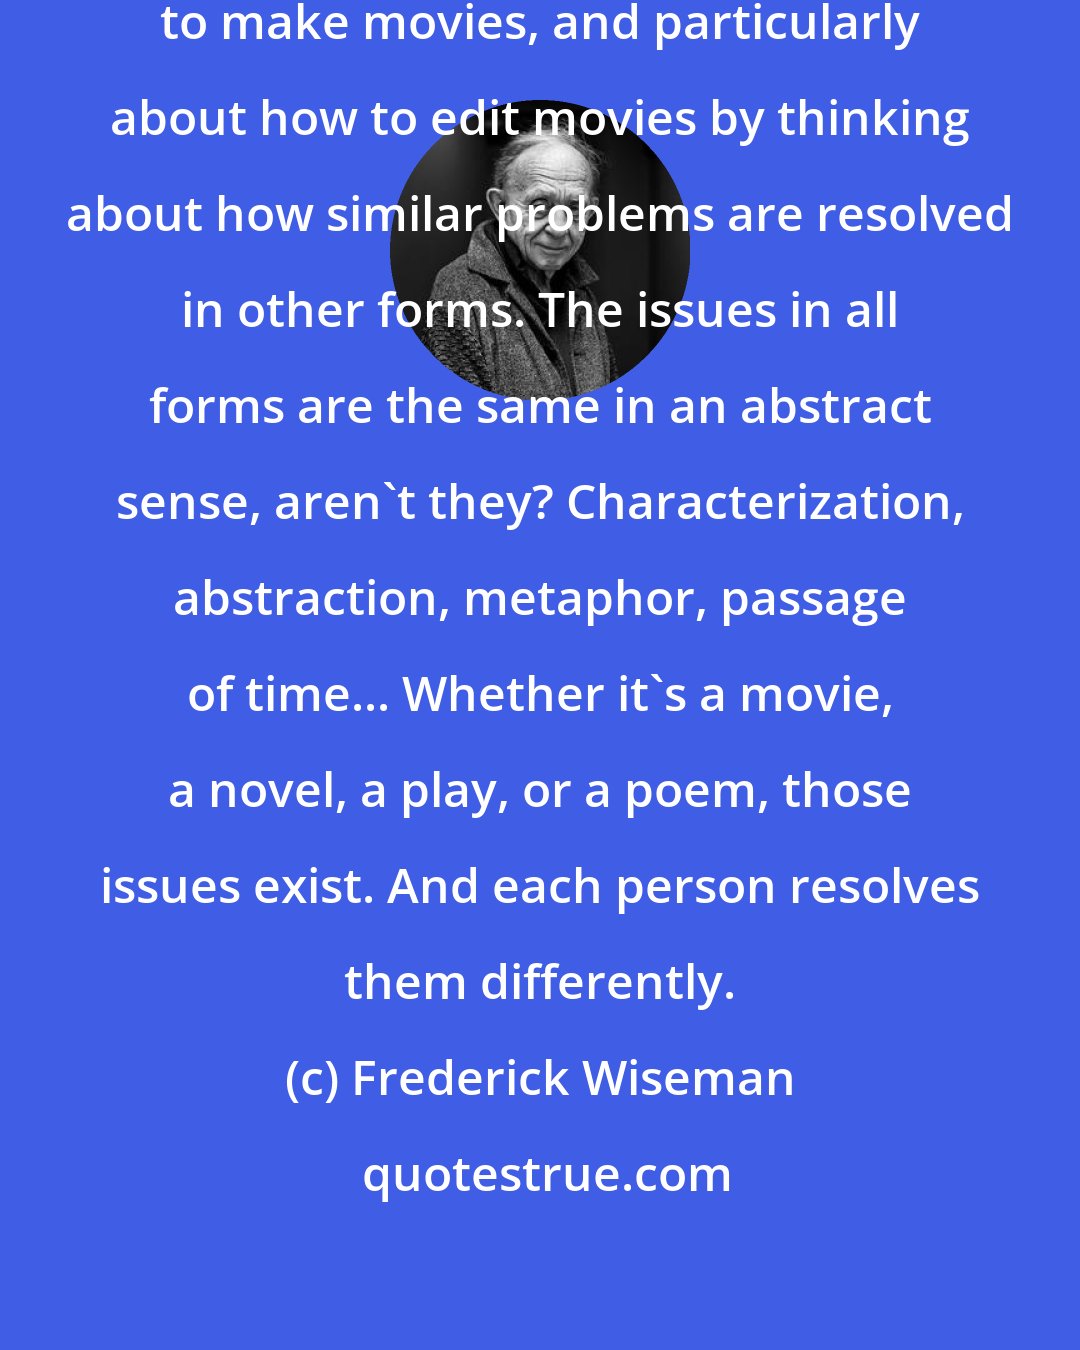 Frederick Wiseman: I think I've learned a lot about how to make movies, and particularly about how to edit movies by thinking about how similar problems are resolved in other forms. The issues in all forms are the same in an abstract sense, aren't they? Characterization, abstraction, metaphor, passage of time... Whether it's a movie, a novel, a play, or a poem, those issues exist. And each person resolves them differently.